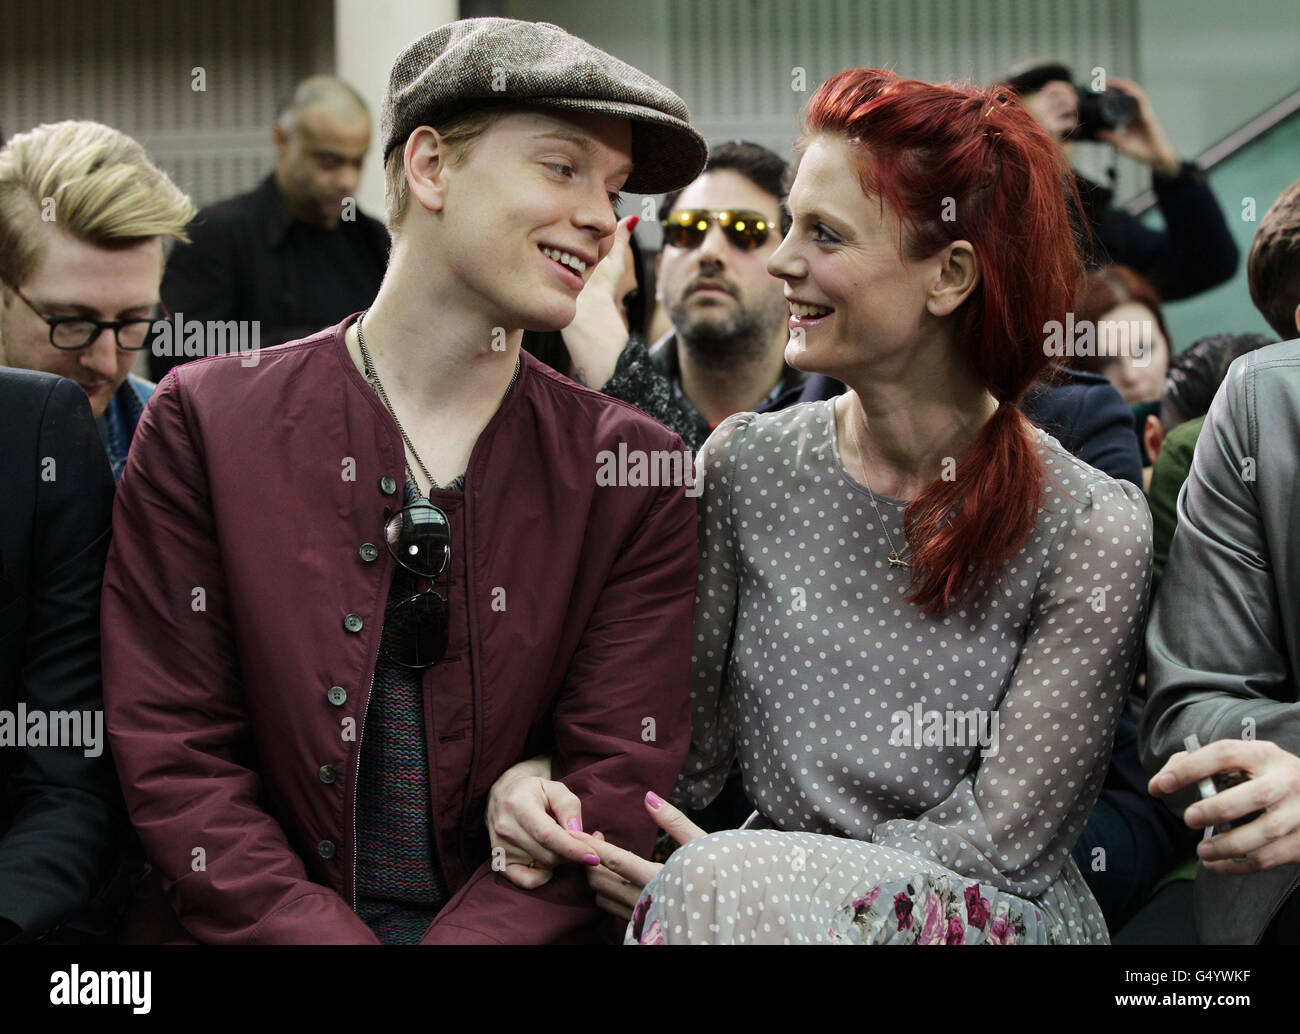 Emilia Fox and her brother Freddie attending the TOPMAN Design autumn/winter London Fashion Week show, at the Royal Opera House in central London. Stock Photo